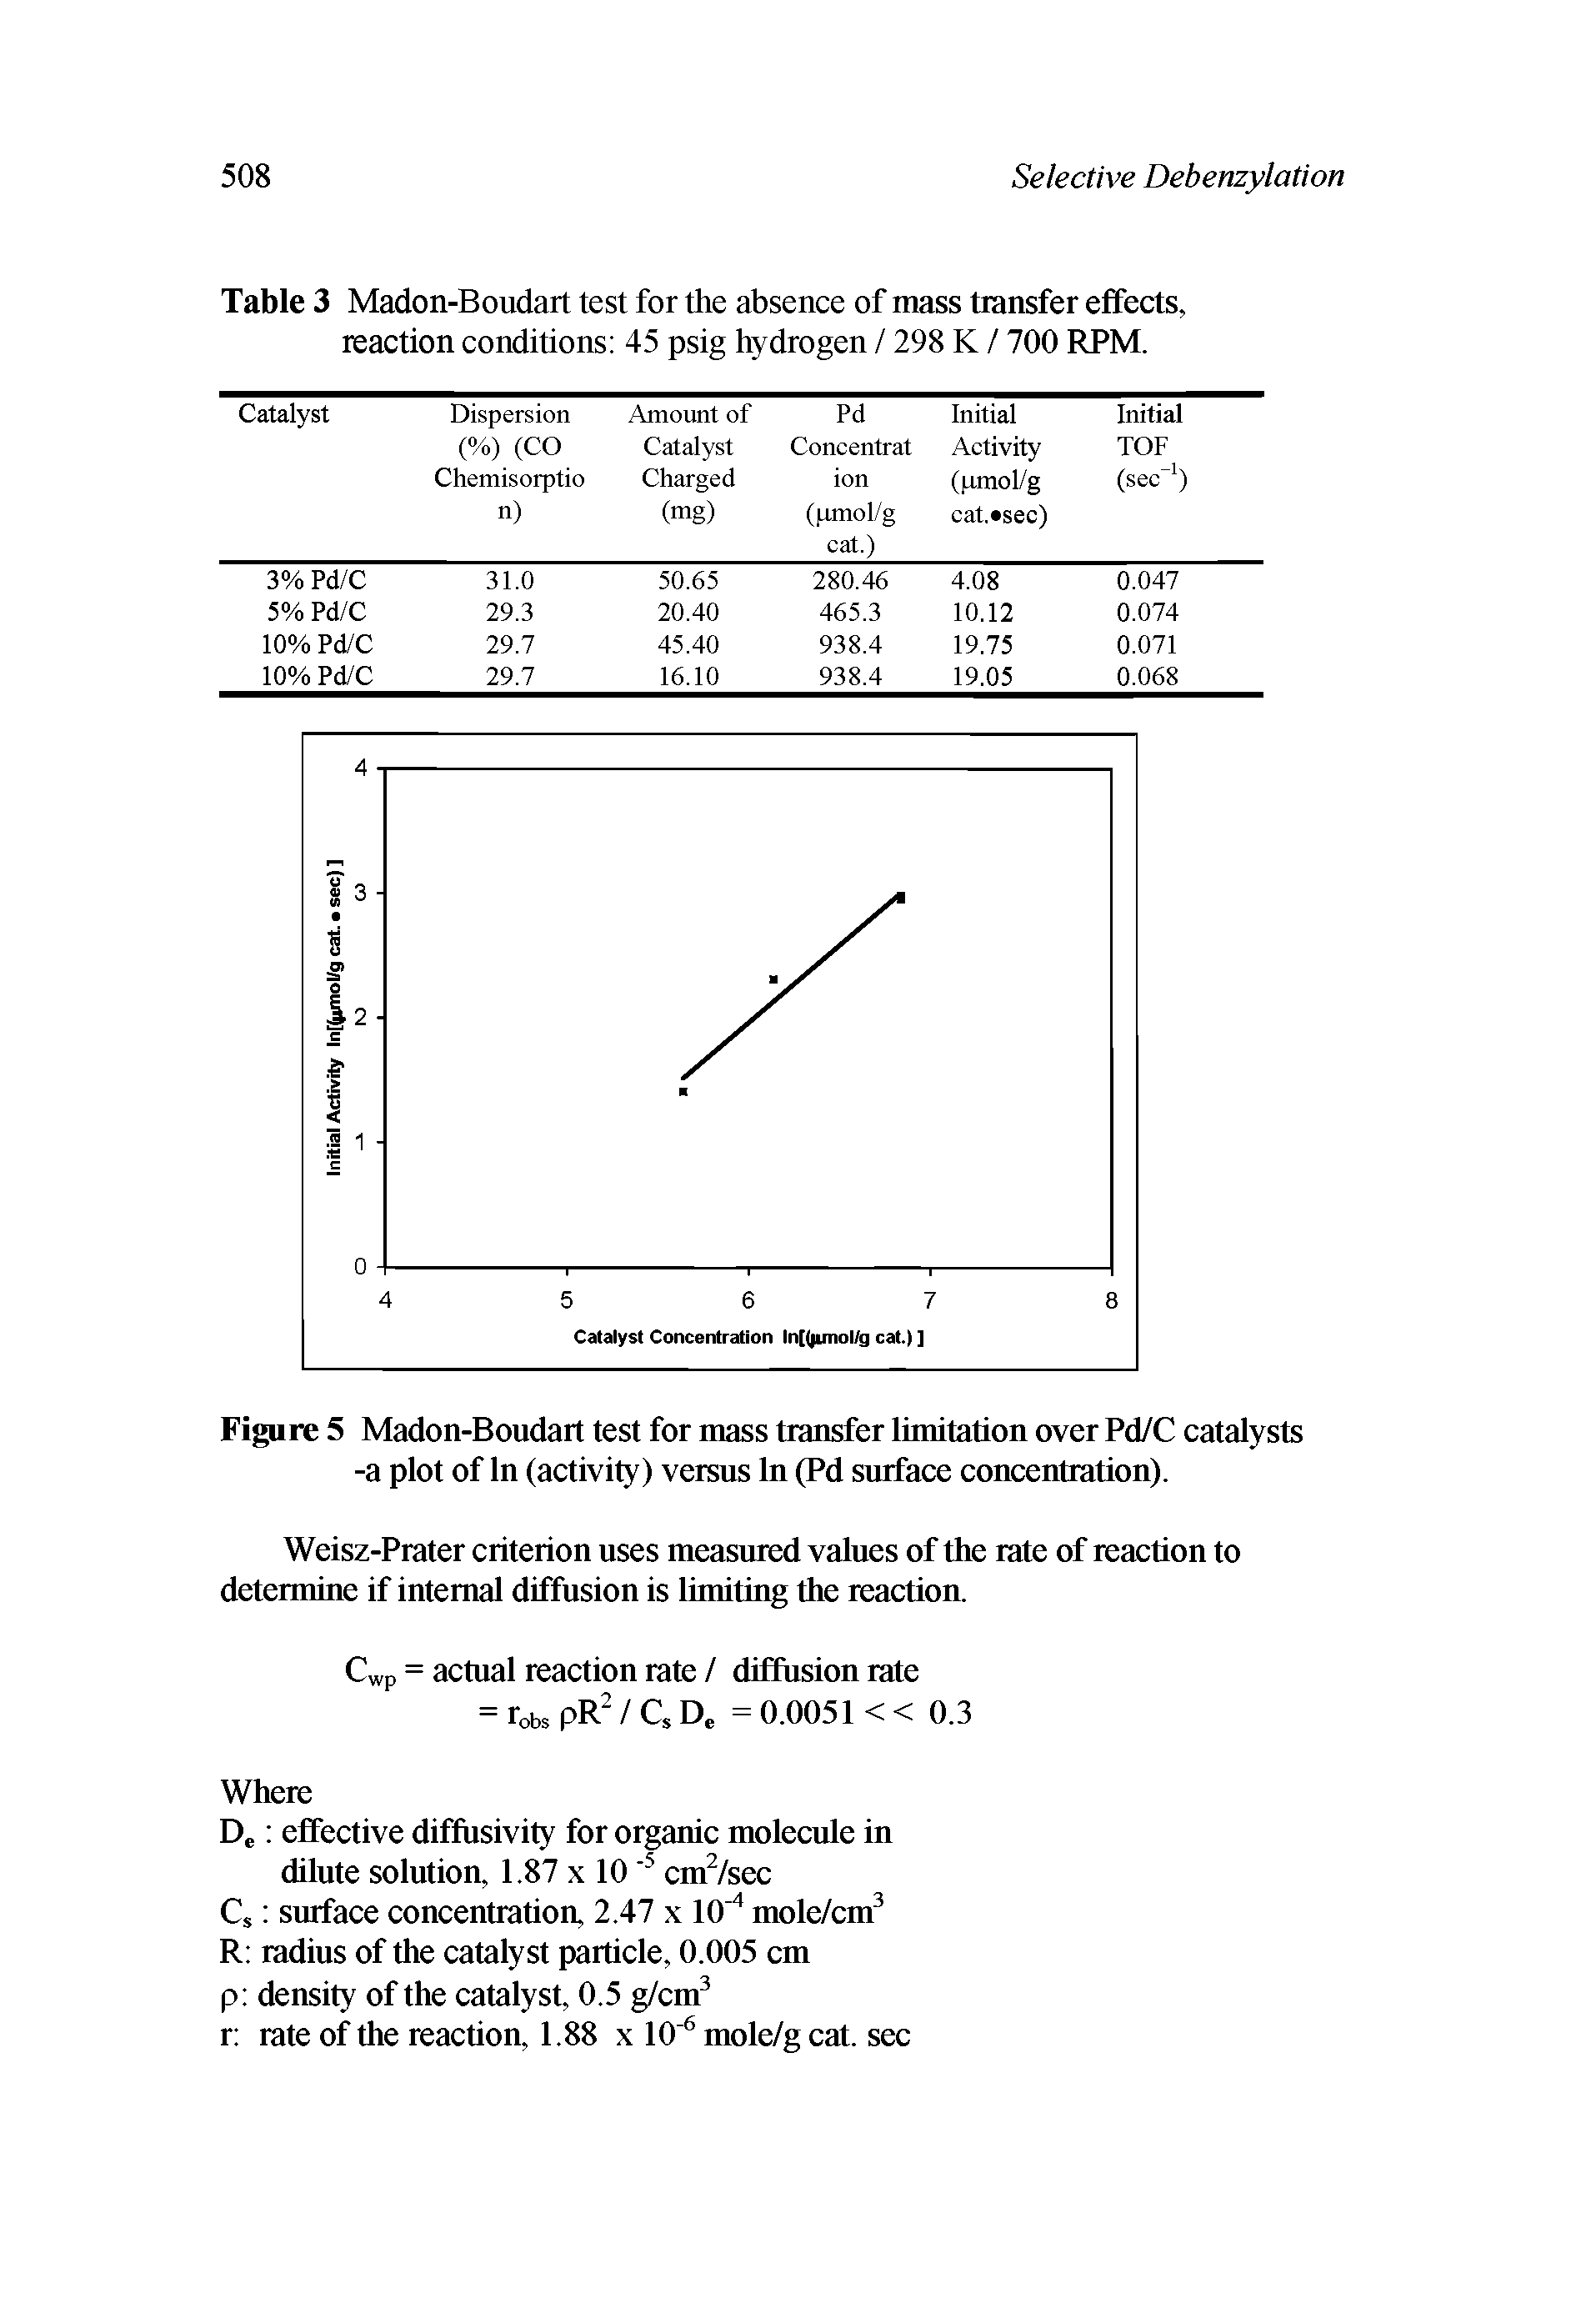 Table 3 Madon-Boudart test for the absence of mass transfer effects, reaction conditions 45 psig hydrogen / 298 K / 700 RPM.